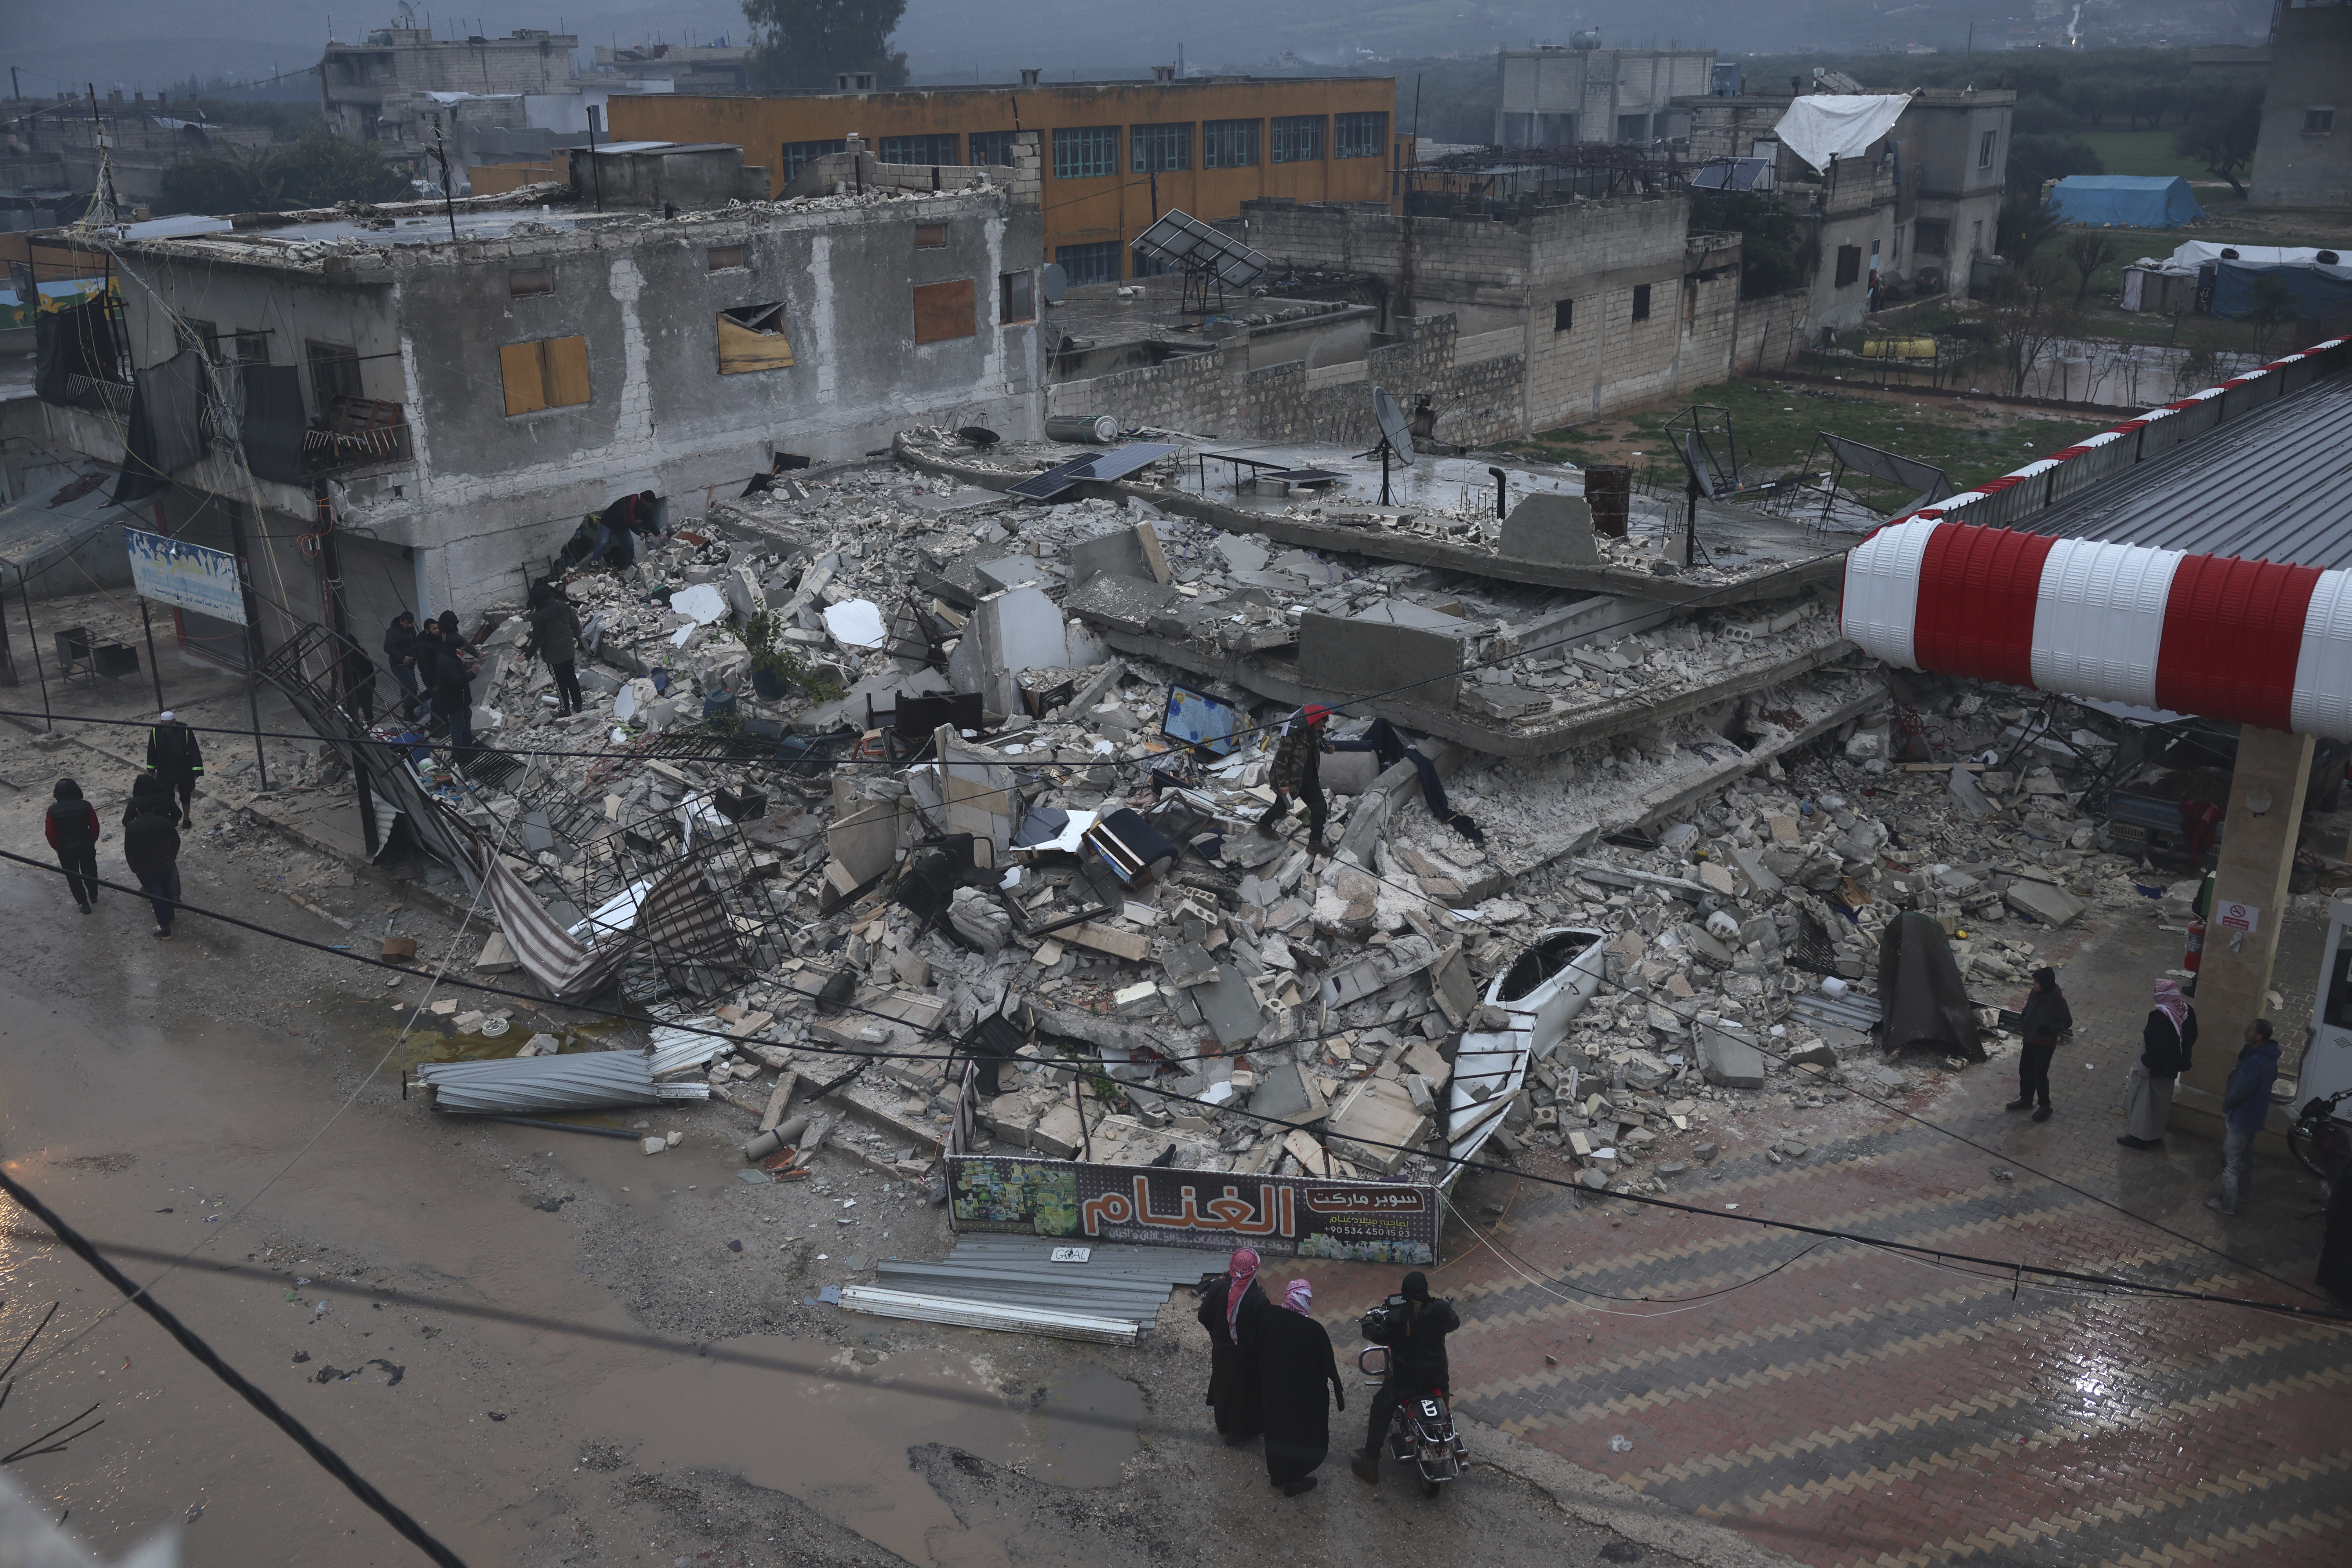 People search a collapsed building following an earthquake in Syria, on February 6.